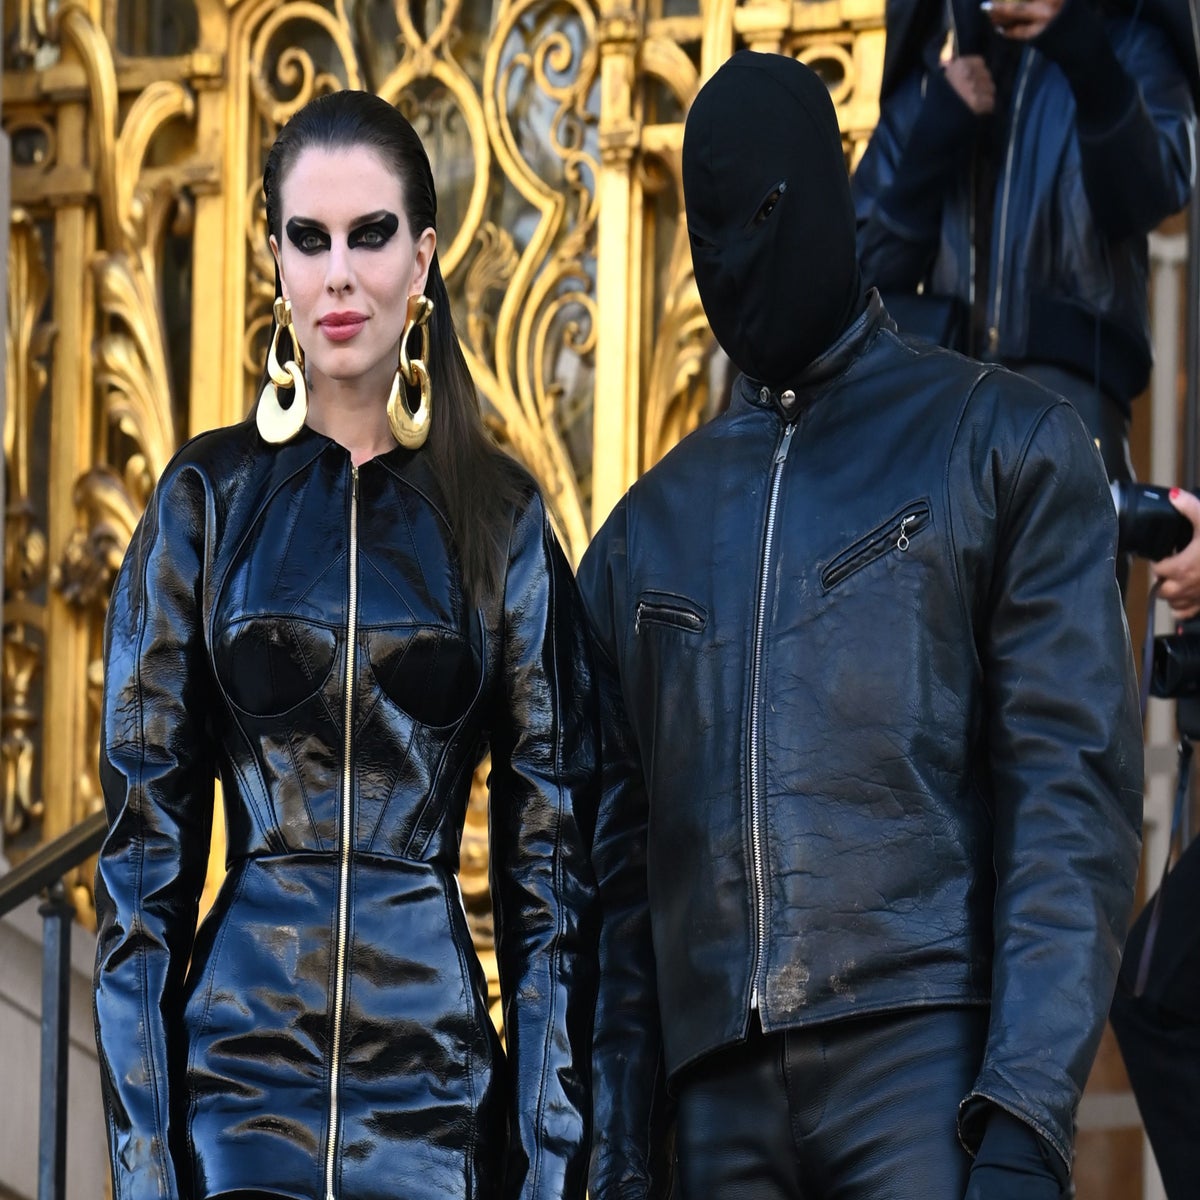 kanye west using a full face covering black mask, a